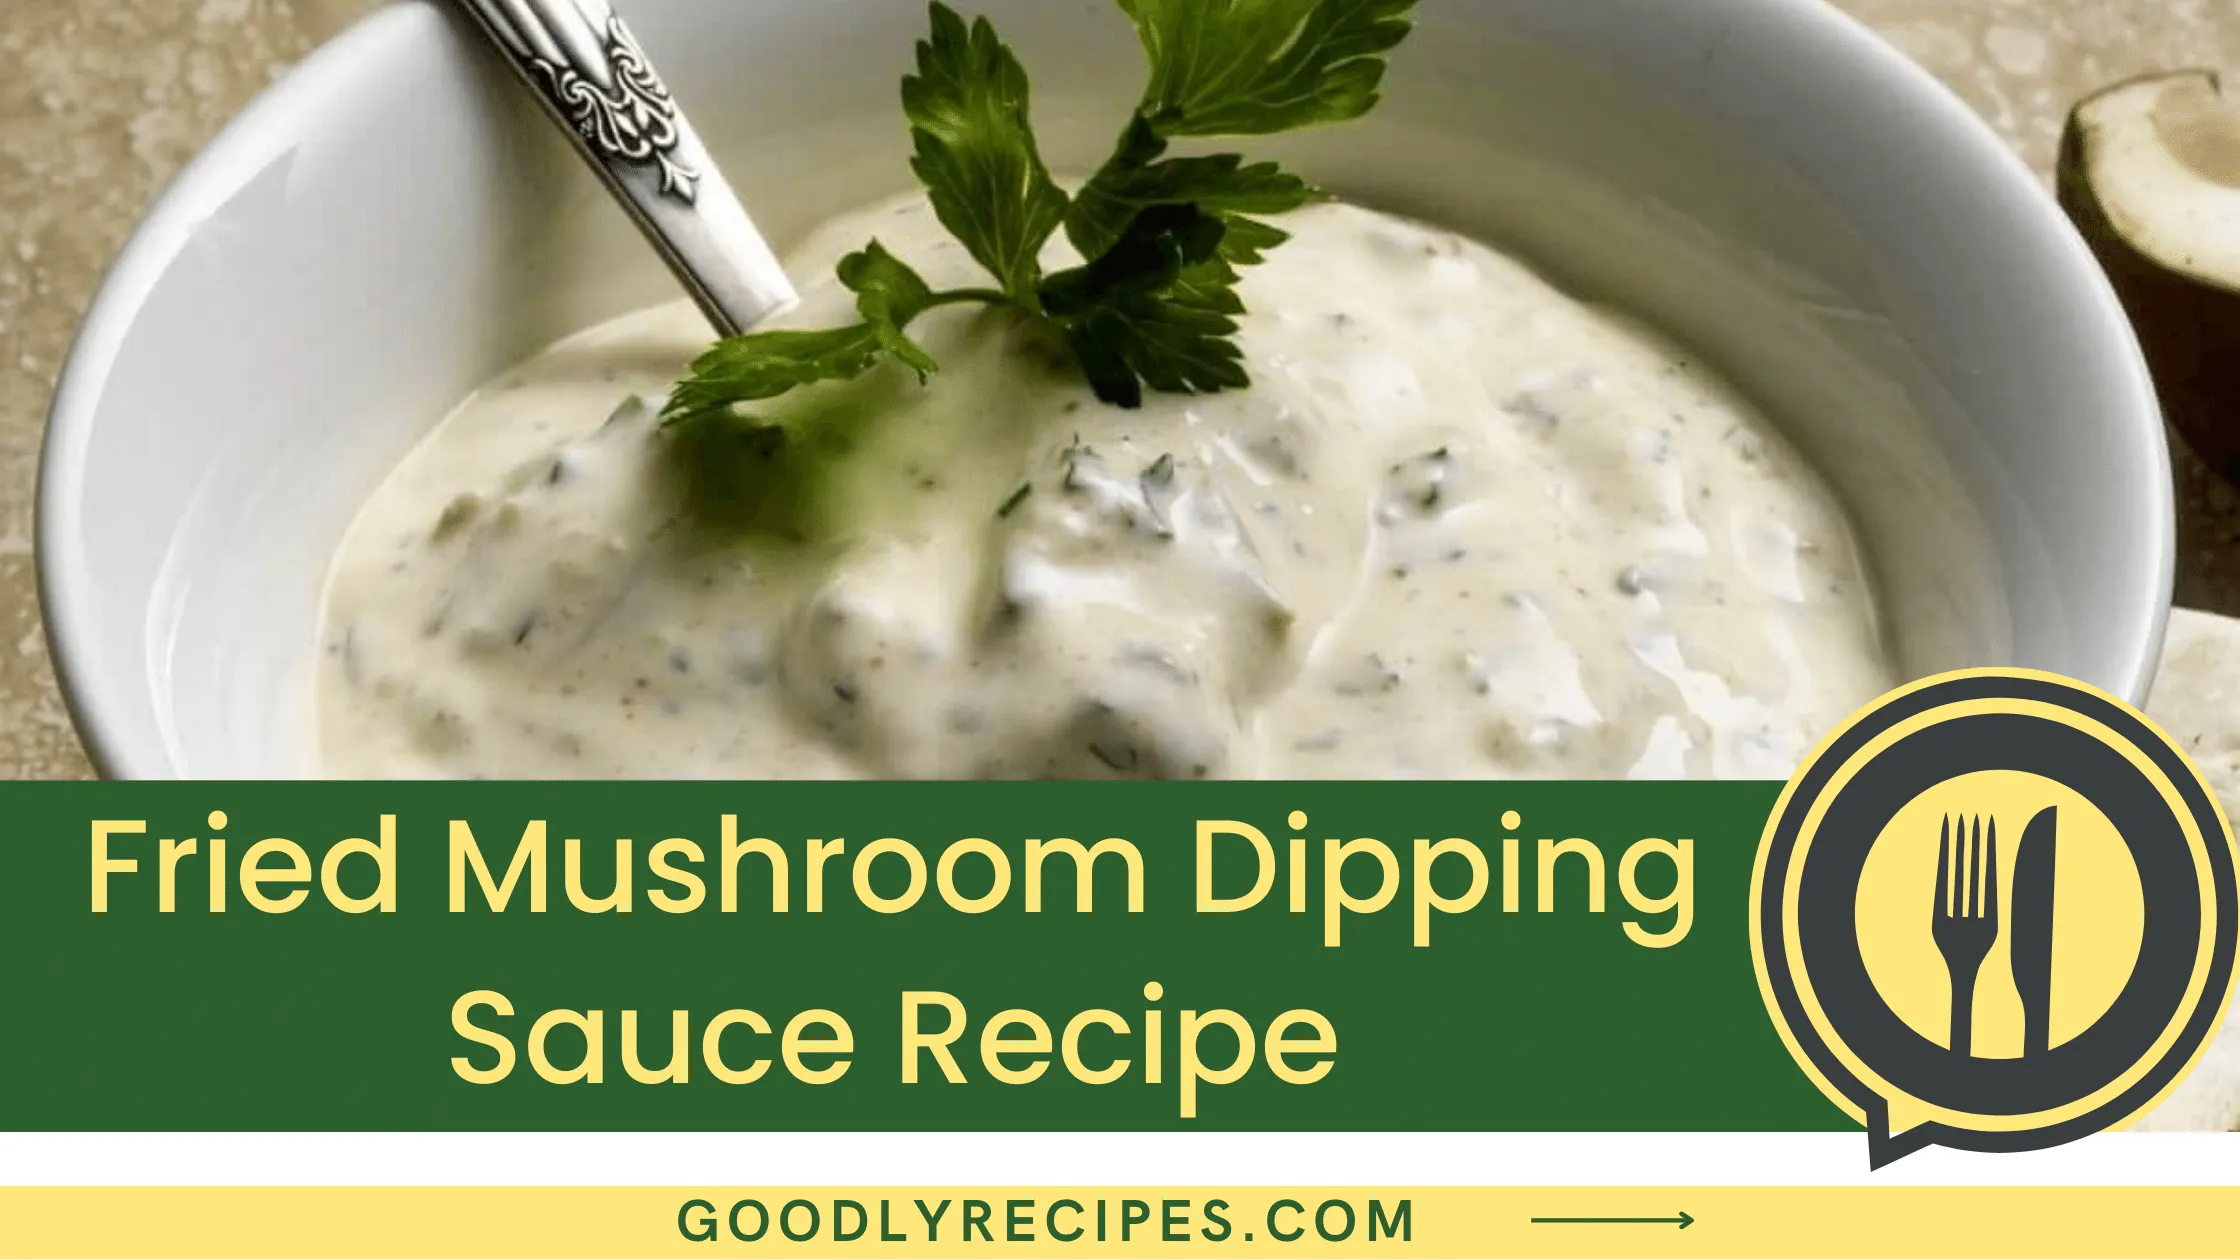 Fried Mushroom Dipping Sauce Recipe - For Food Lovers